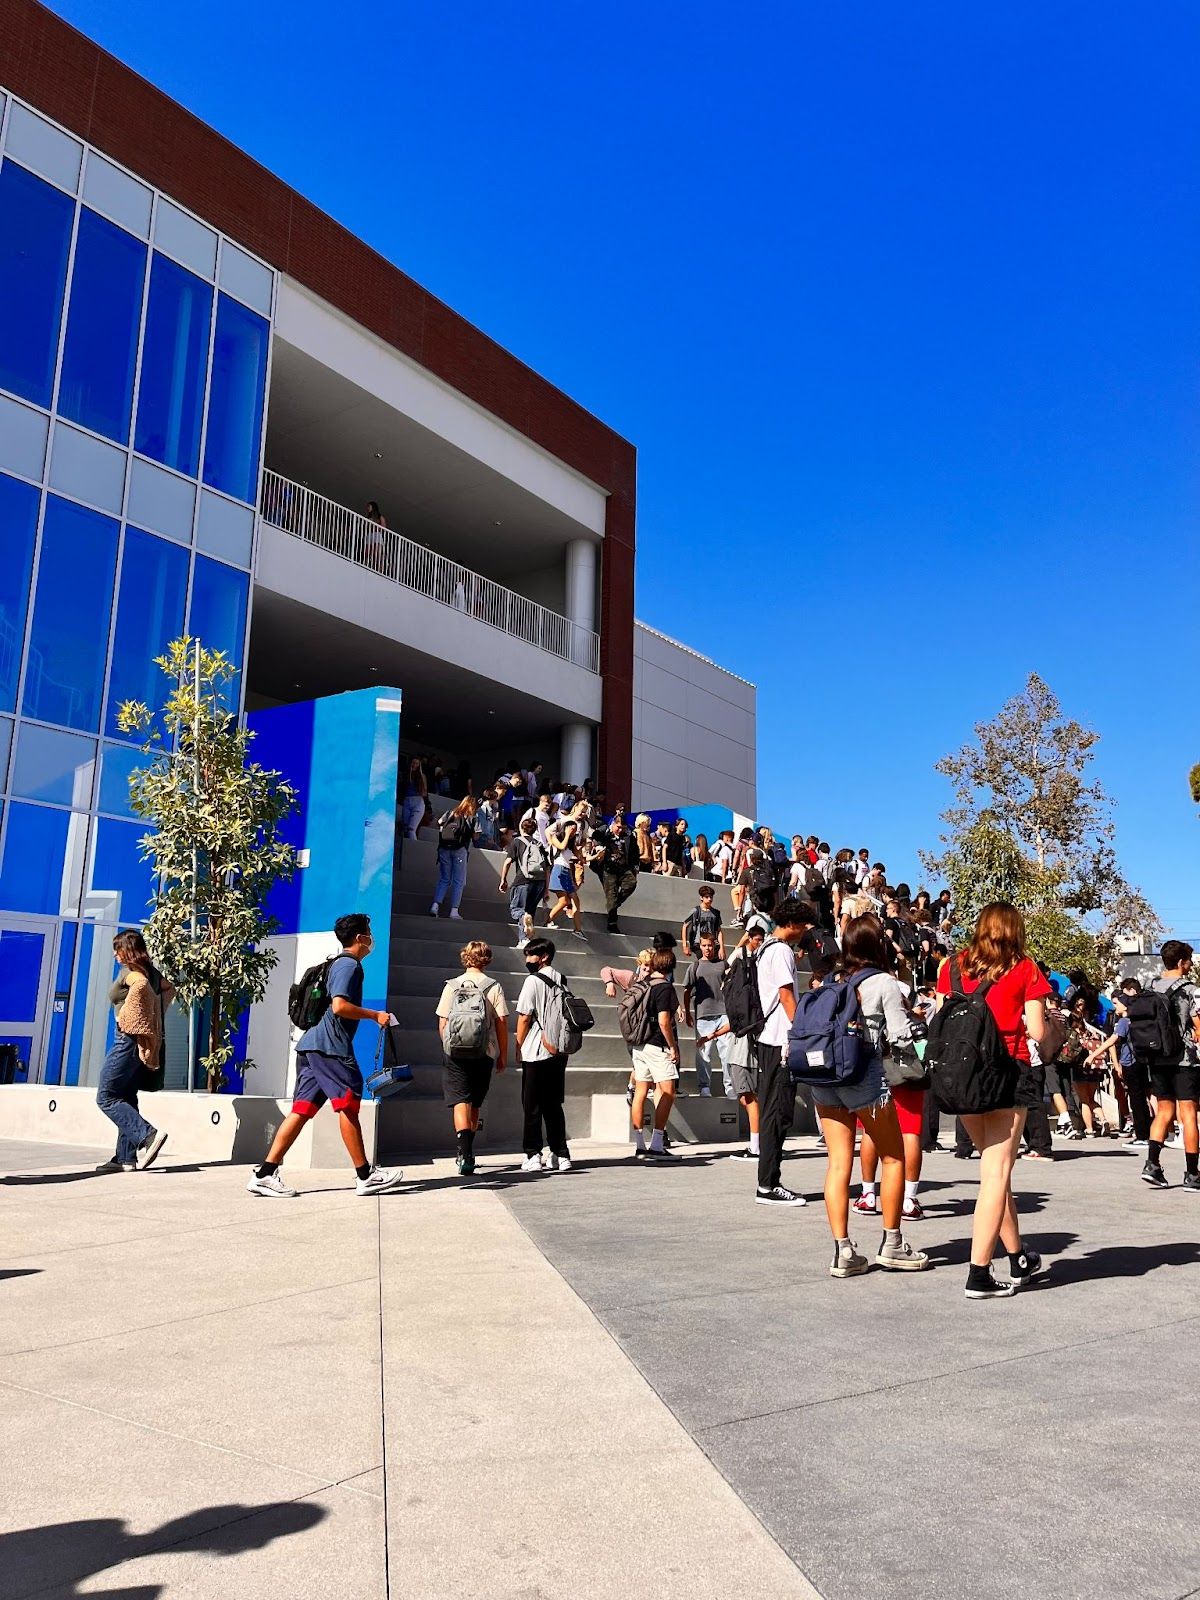 Students walk up and down the 'grand staircase' of the new STEM building at Los Alamitos High School on the first day of school, August 15. It was the first day students were able to attend classes in the new $67 million building. Photo by Jeannette Andruss